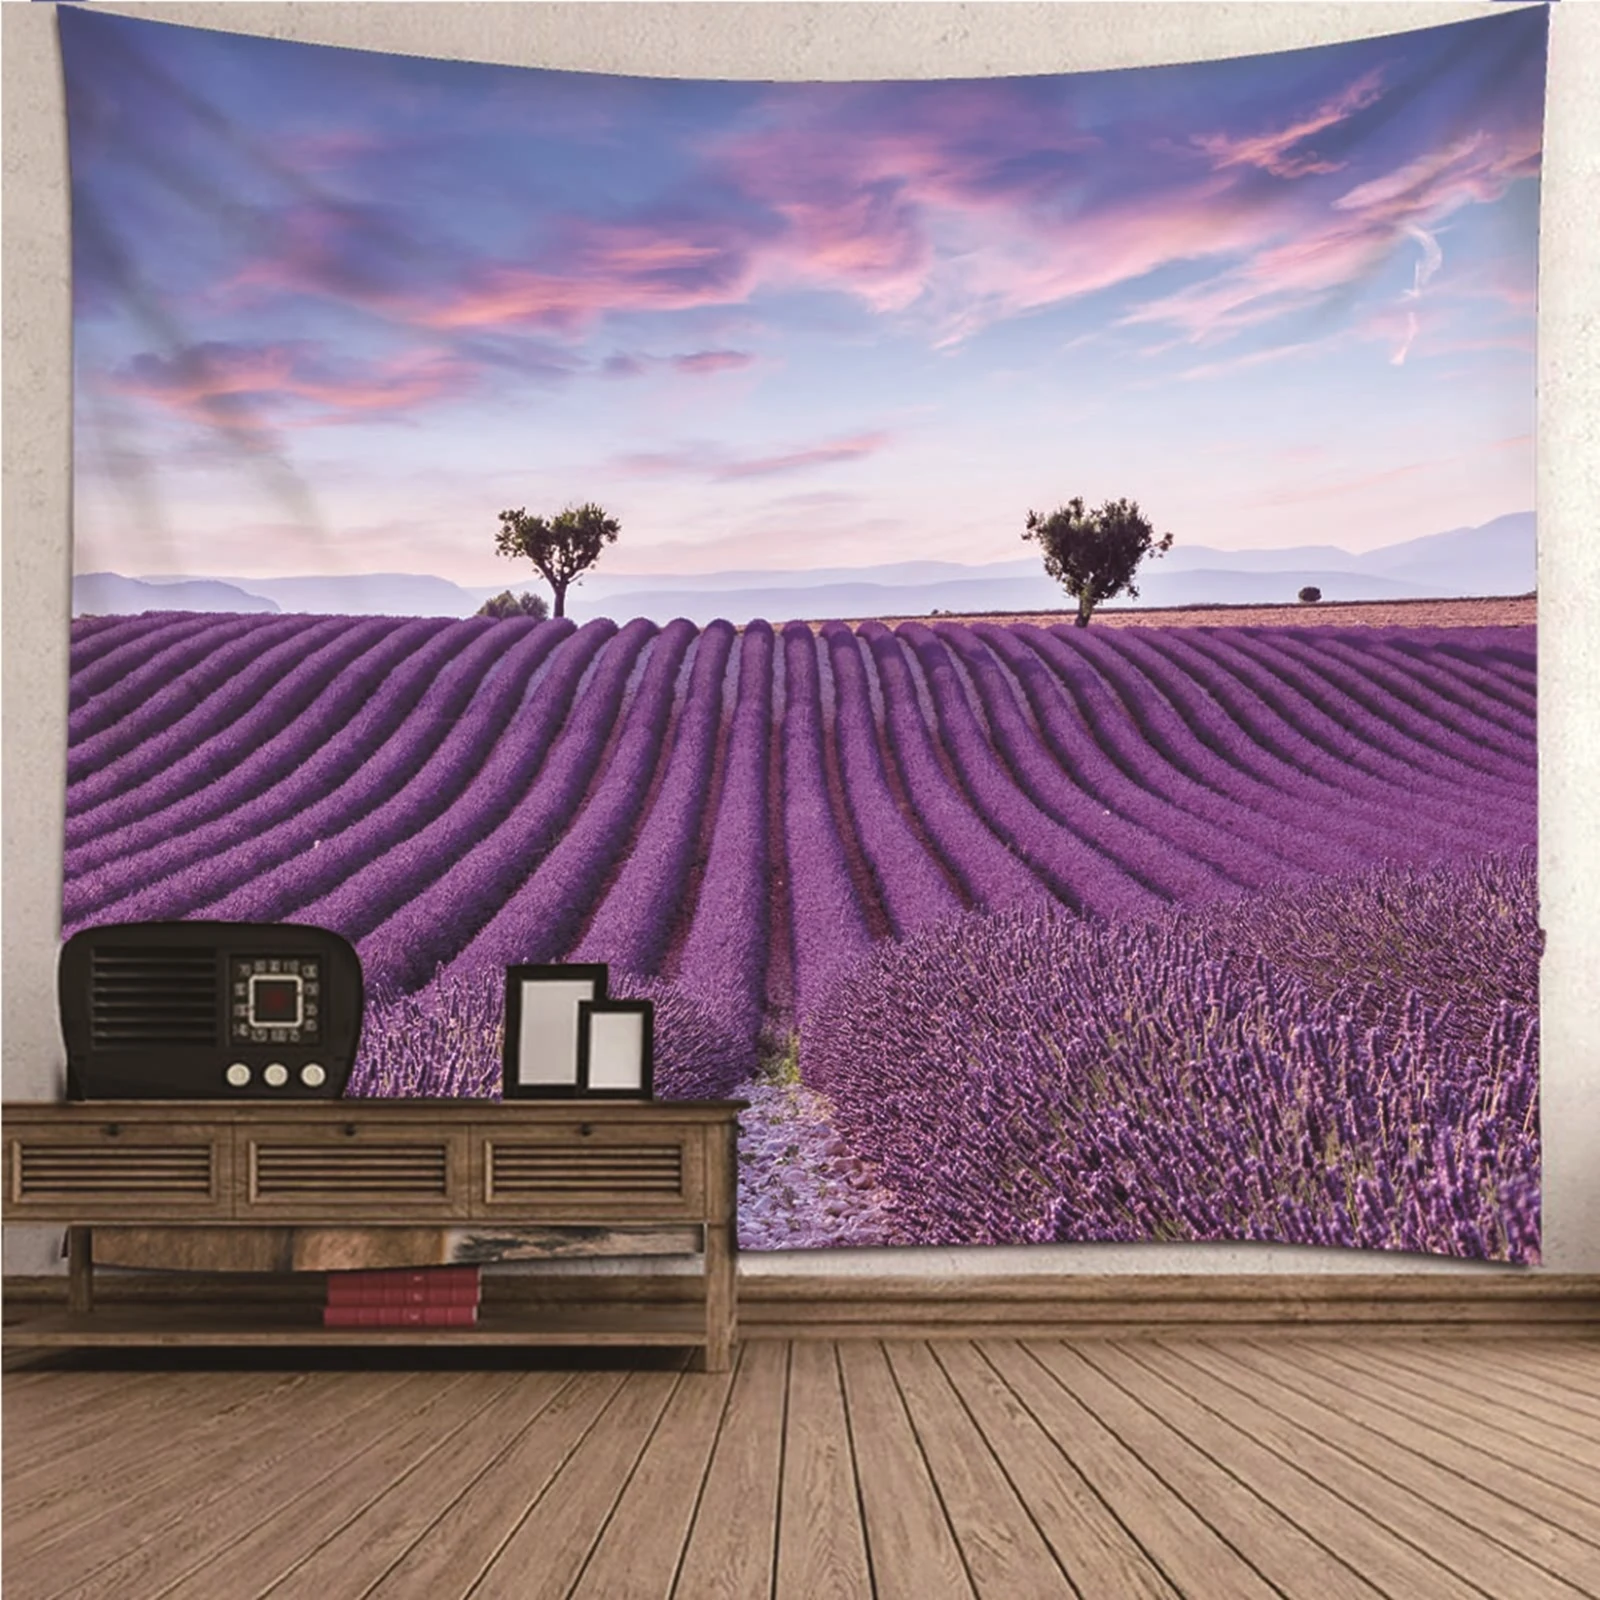 

Tapestries Boys Wall Decor Tapestry natural scenery Lavender Field Wall Hanging Blanket Dorm Art Decor Covering